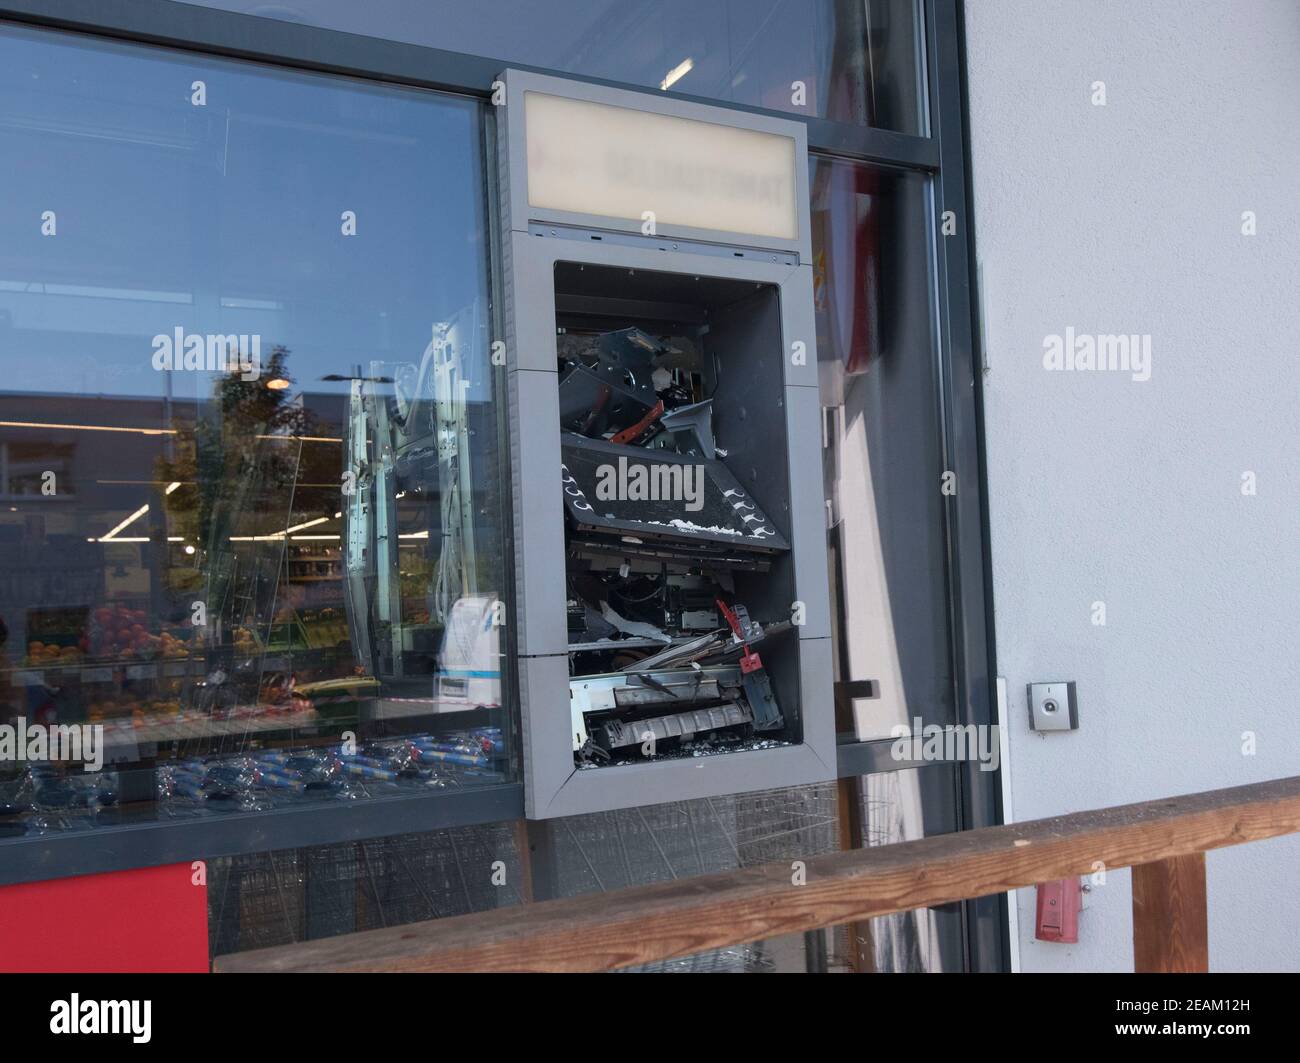 atm burglary and stealing as a criminal offense Stock Photo